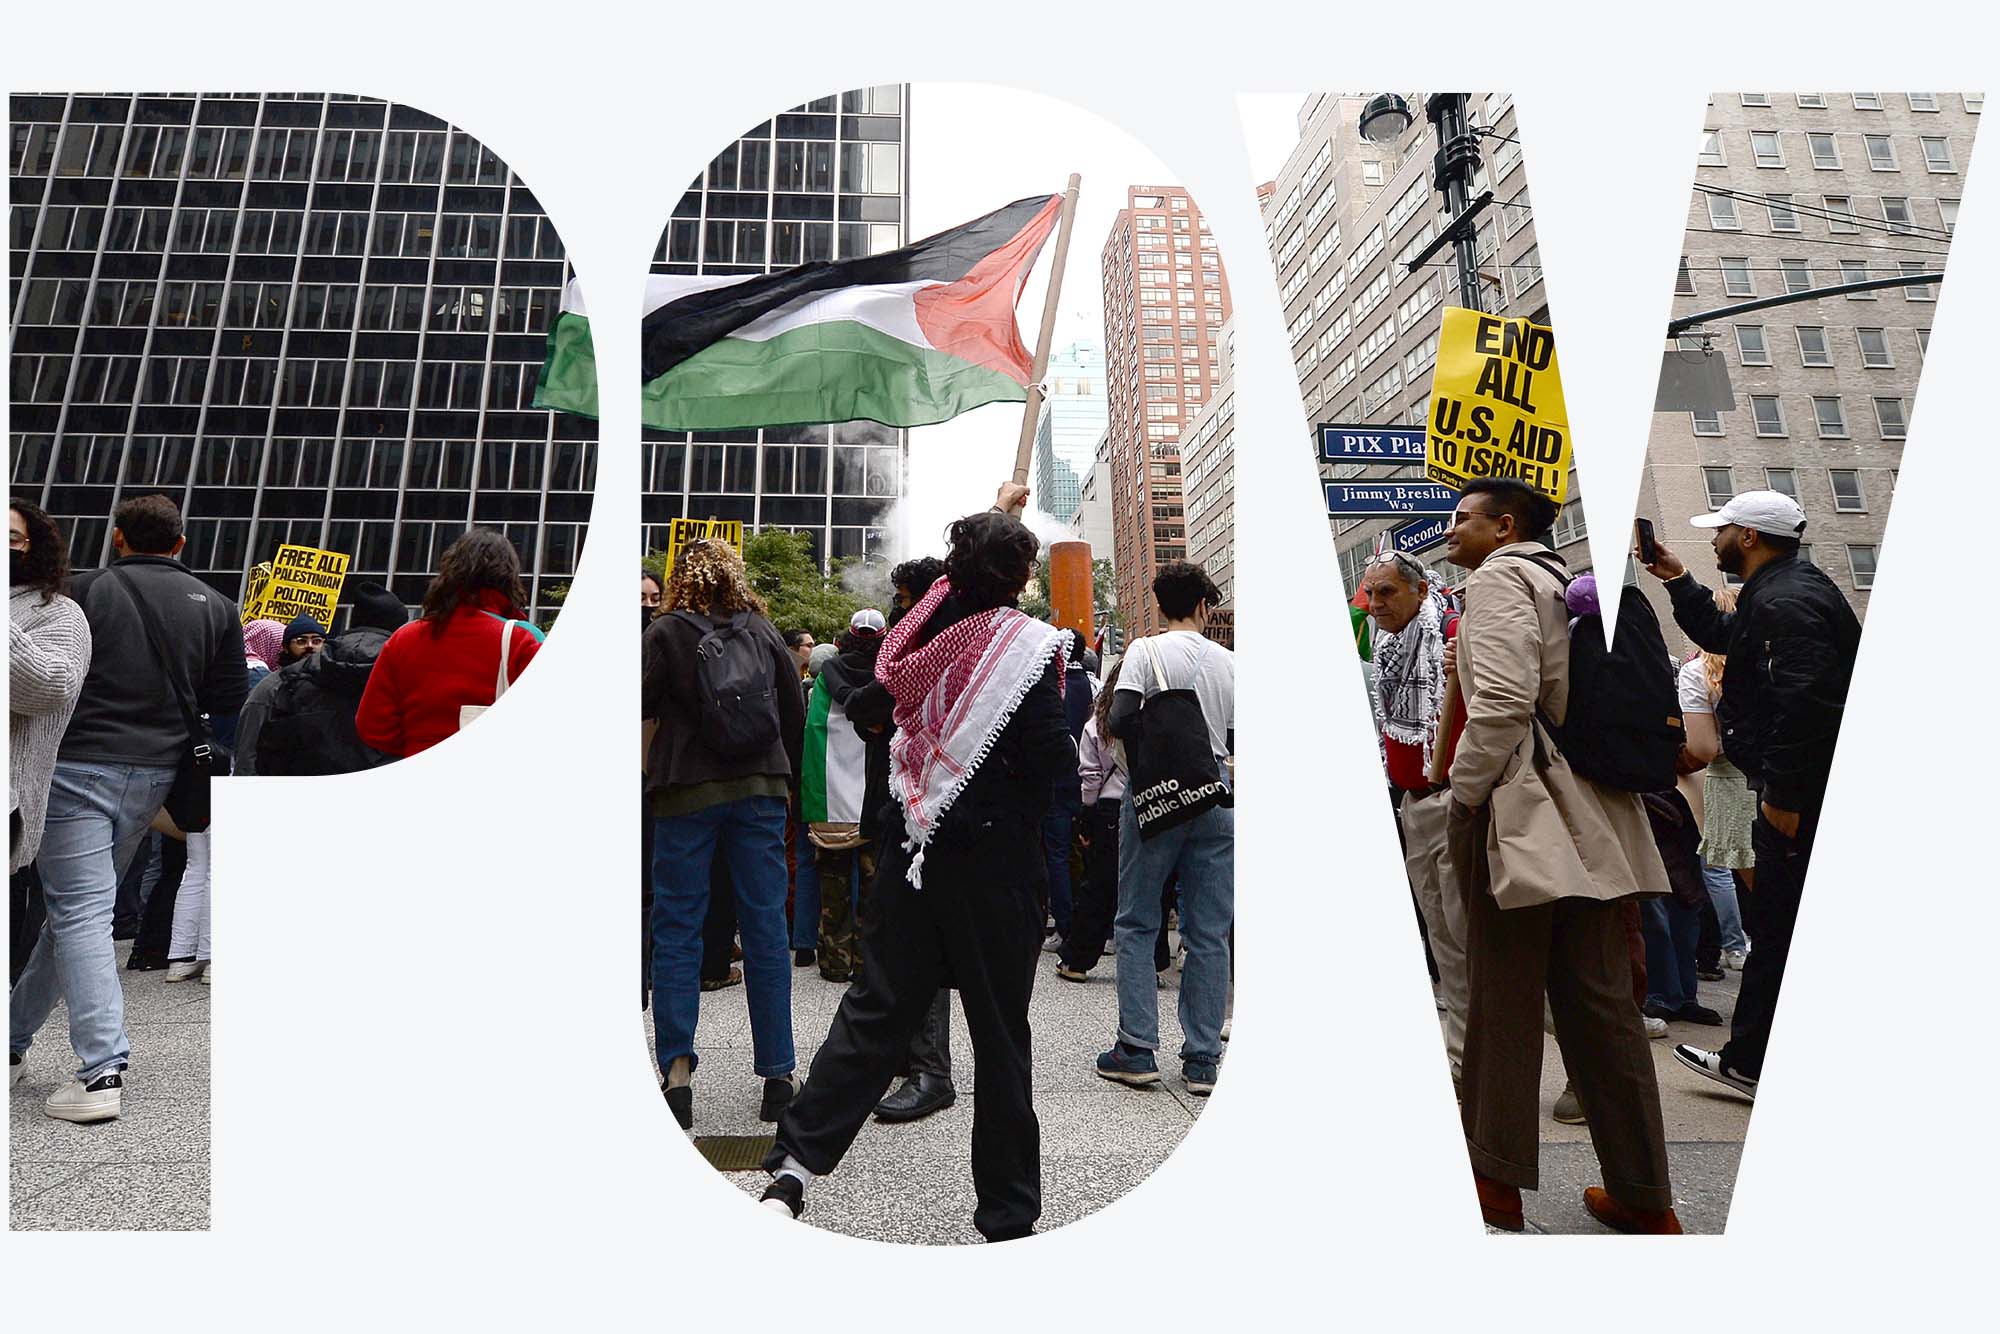 Photo: A group of protestors are shown standing in front of the Consulate General of Israel along Second Avenue, New York, NY. A person in the center holds a large Palestinian flag above the crowd. Image is seen through a white overlay with transparent letters that read "POV".